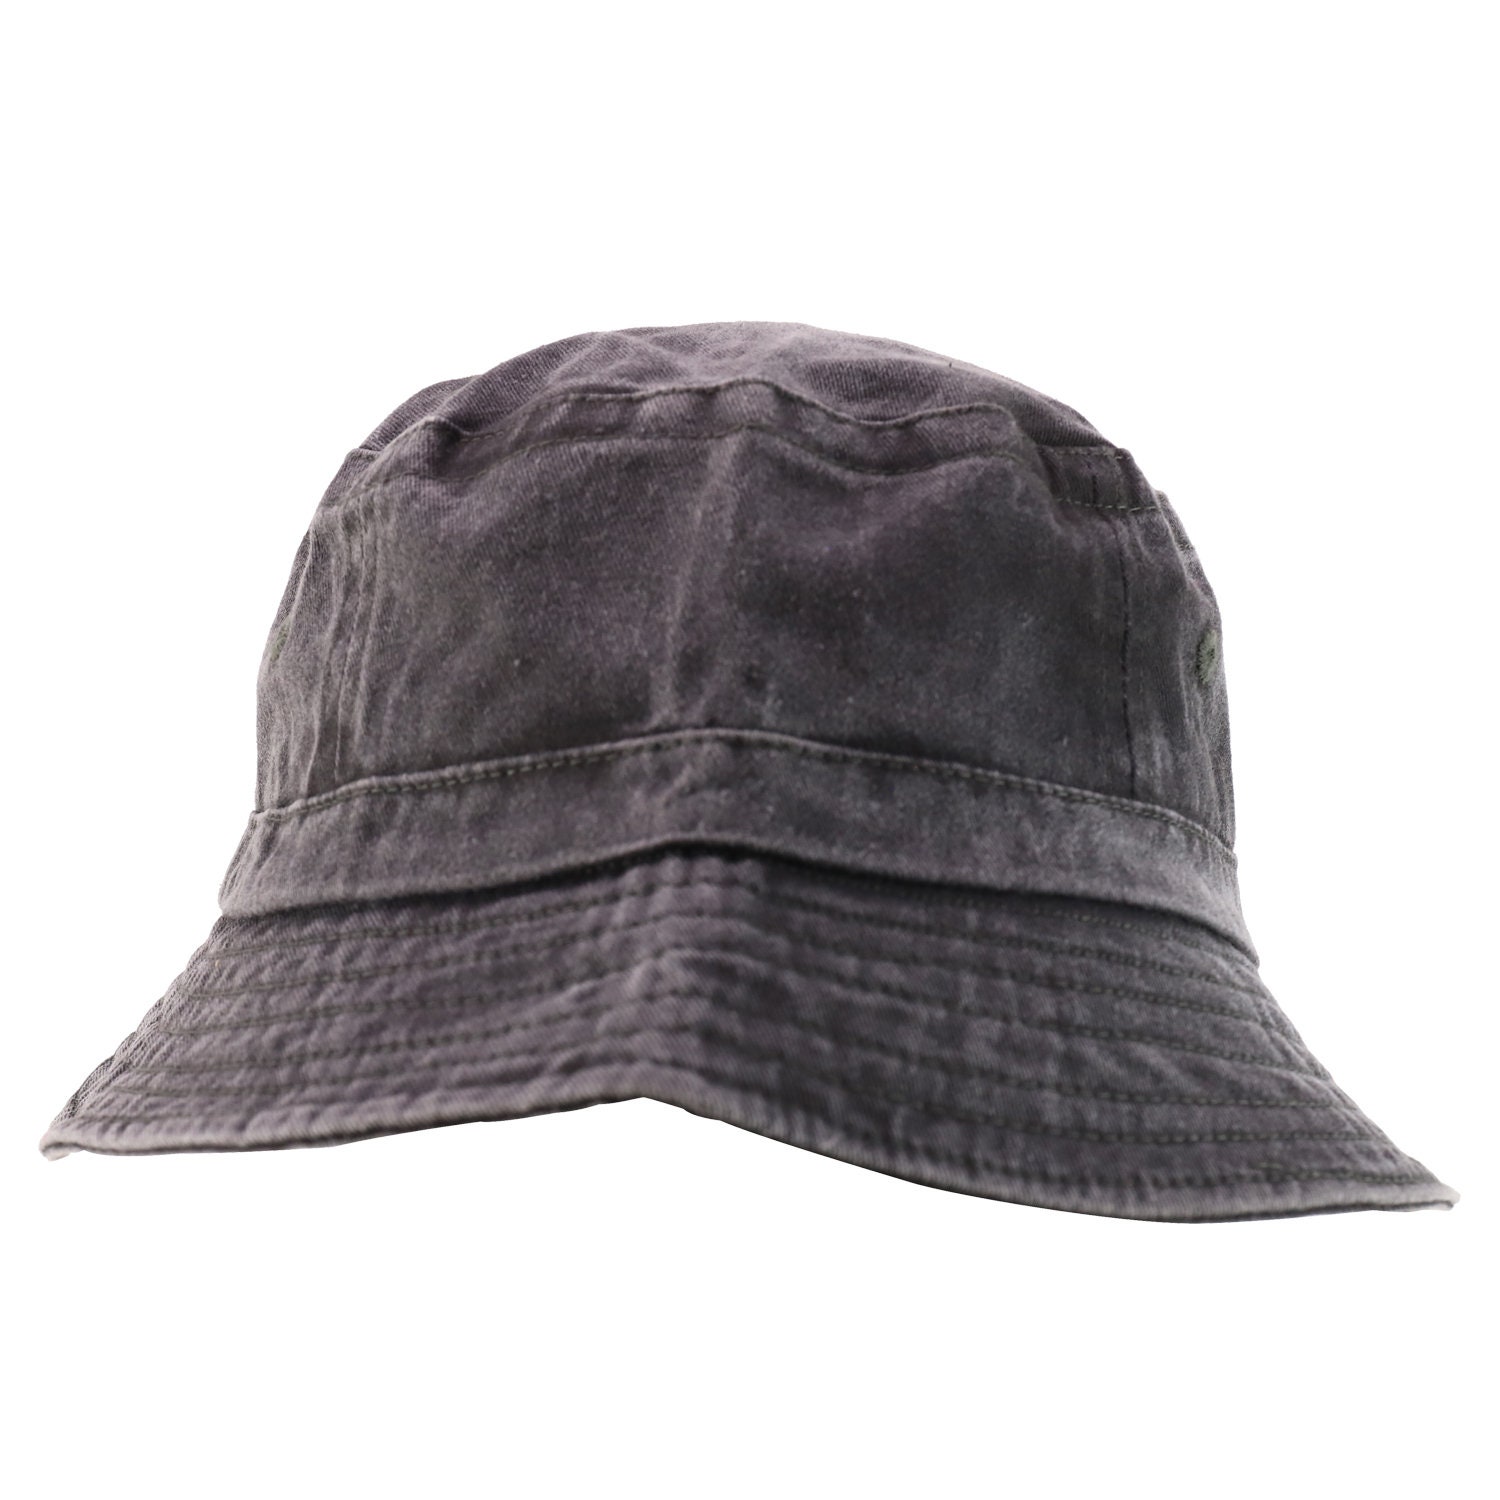 XXL Oversize Pigment Dyed Washed Bucket Hat Fits Upto 3XL